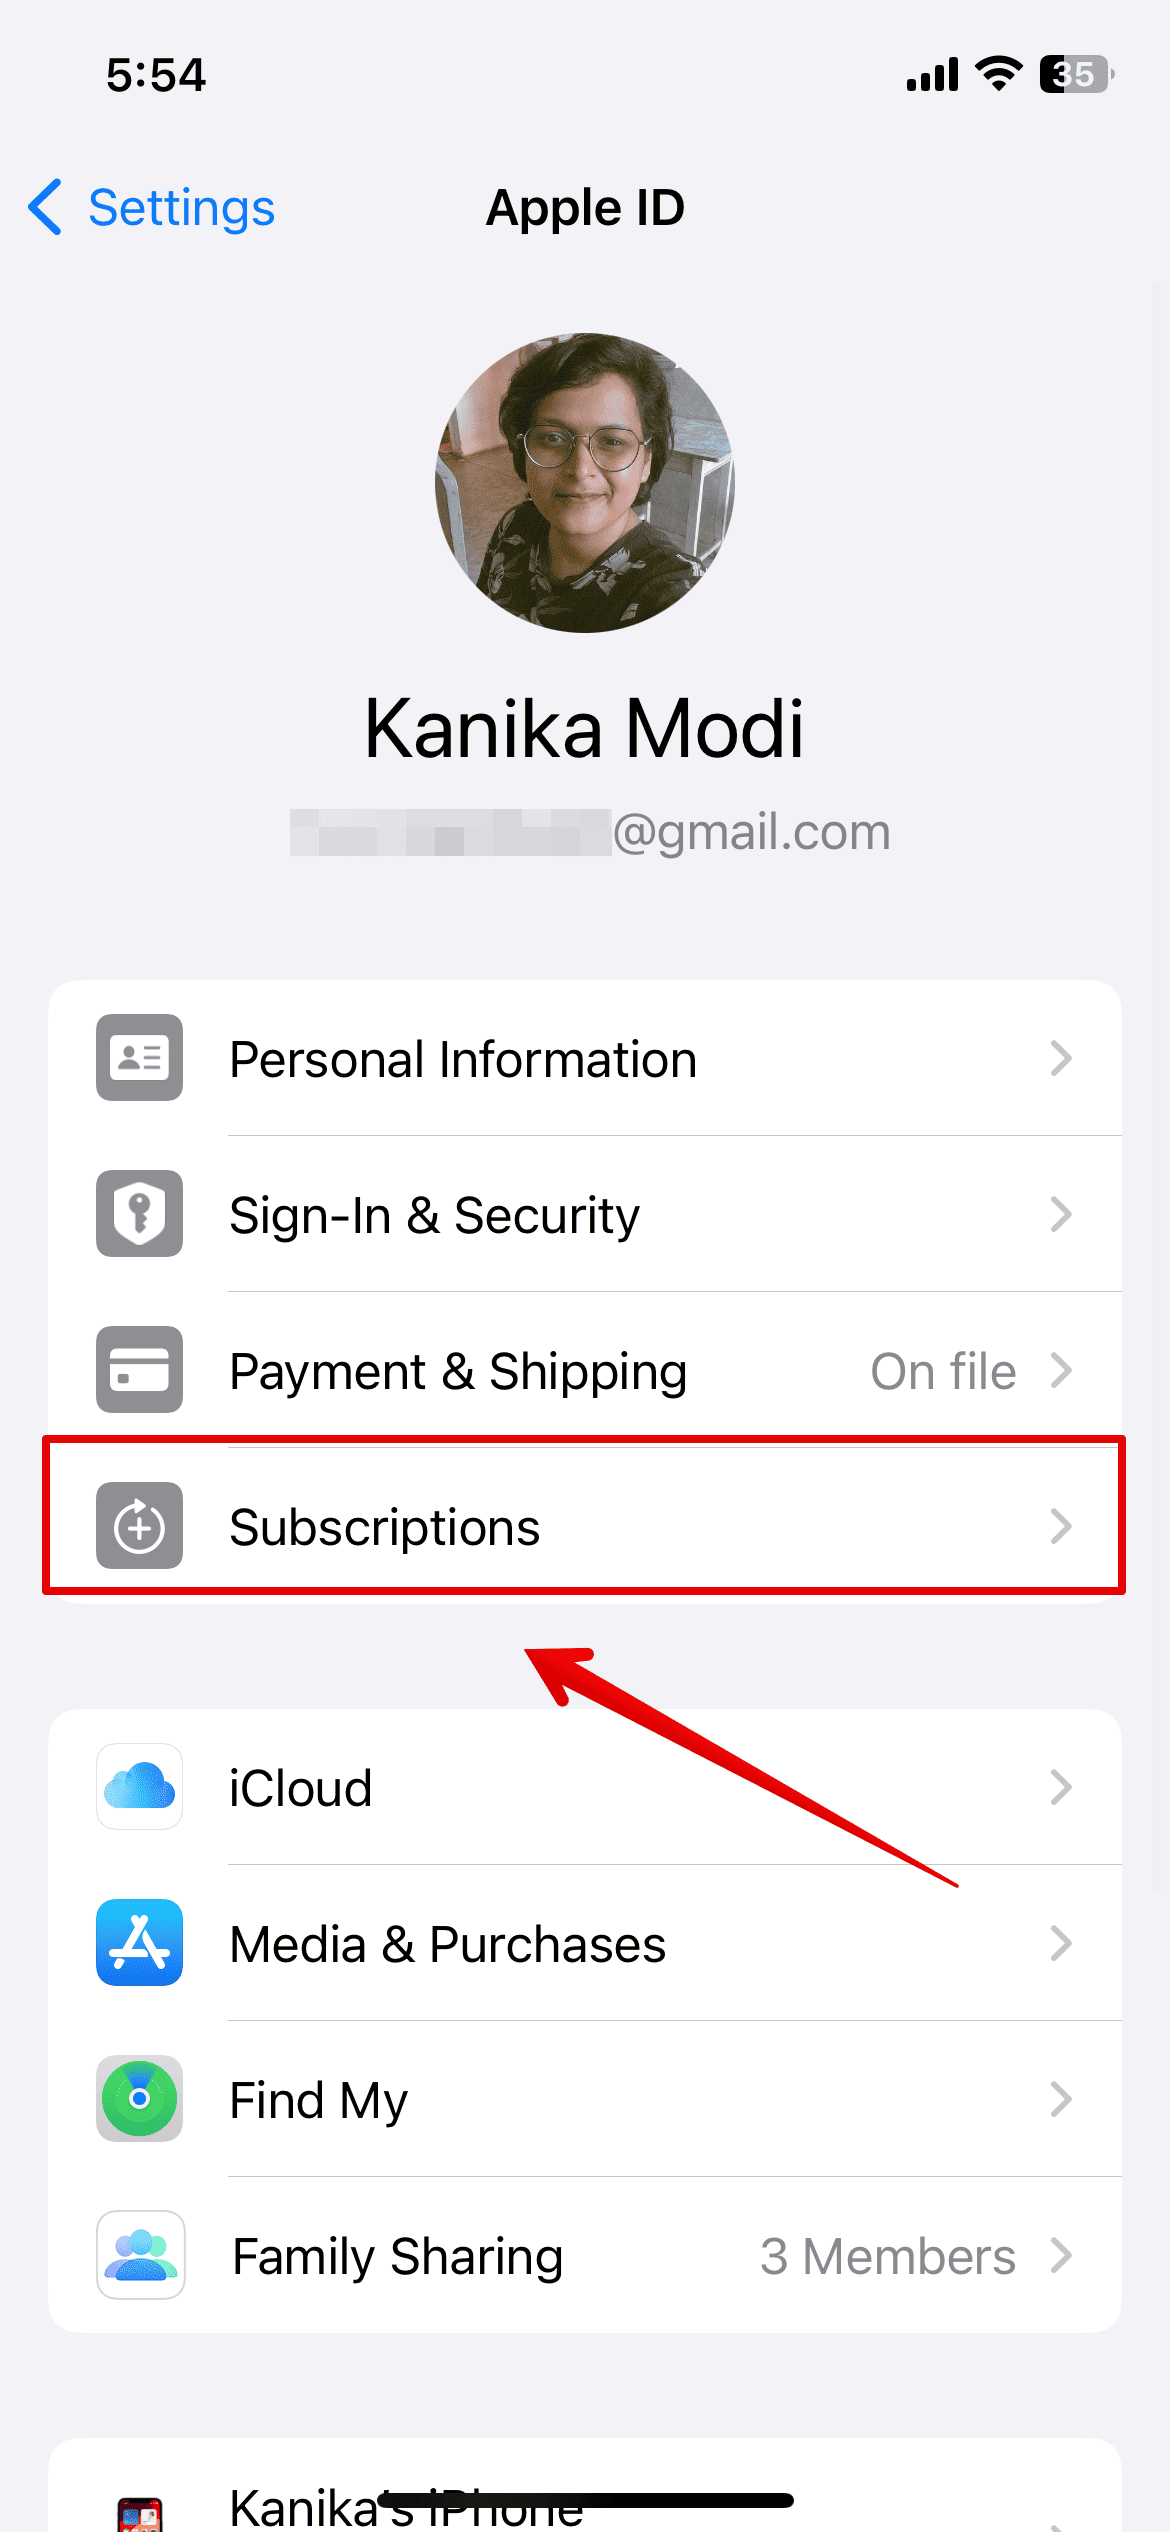 Go to Subscription